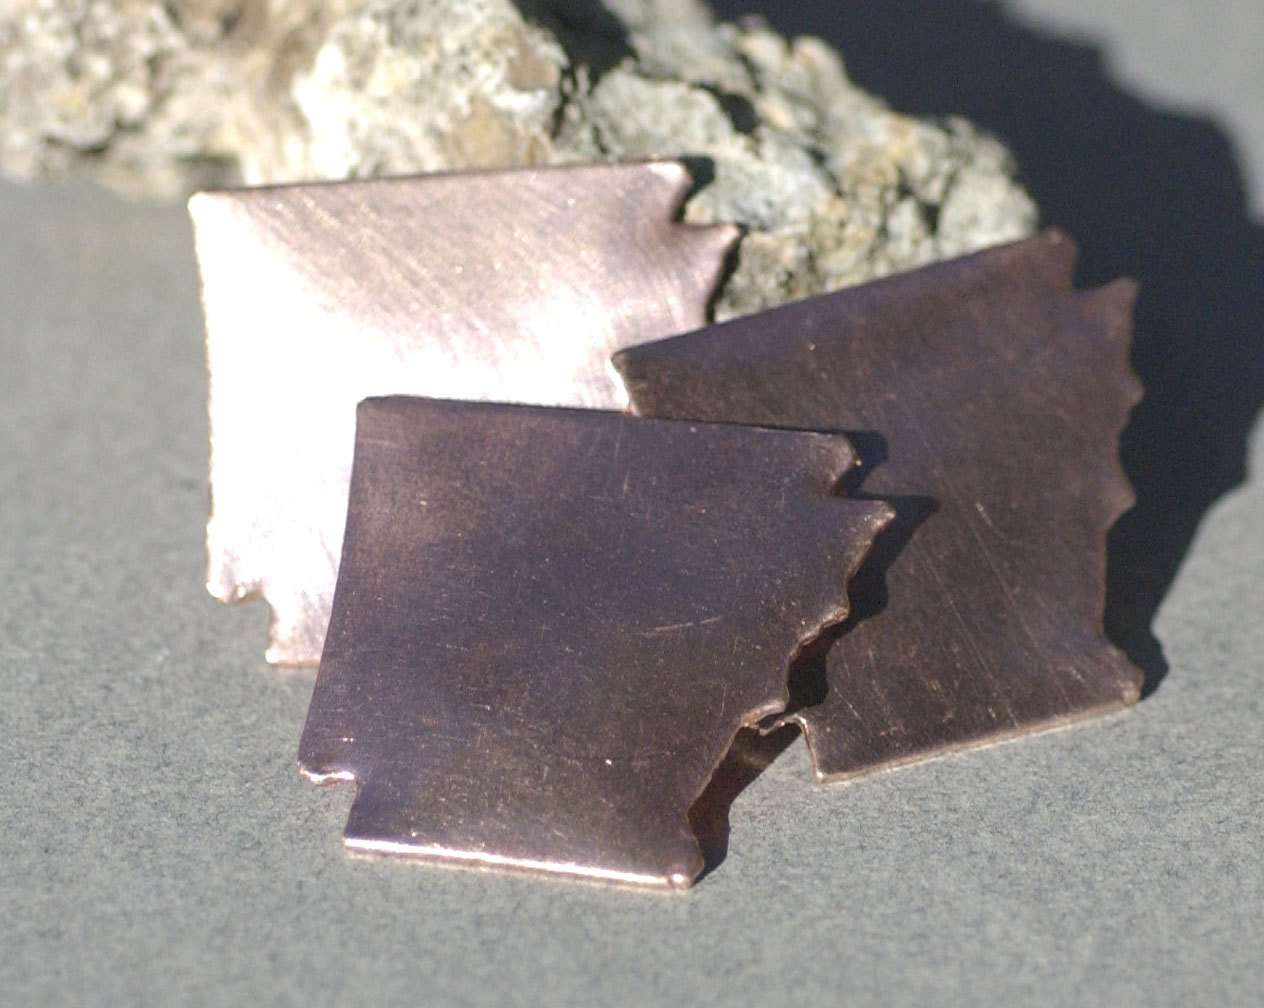 Arkansas State Blanks Cutout for Enameling Metalworking Stamping Texturing- Variety of Metals